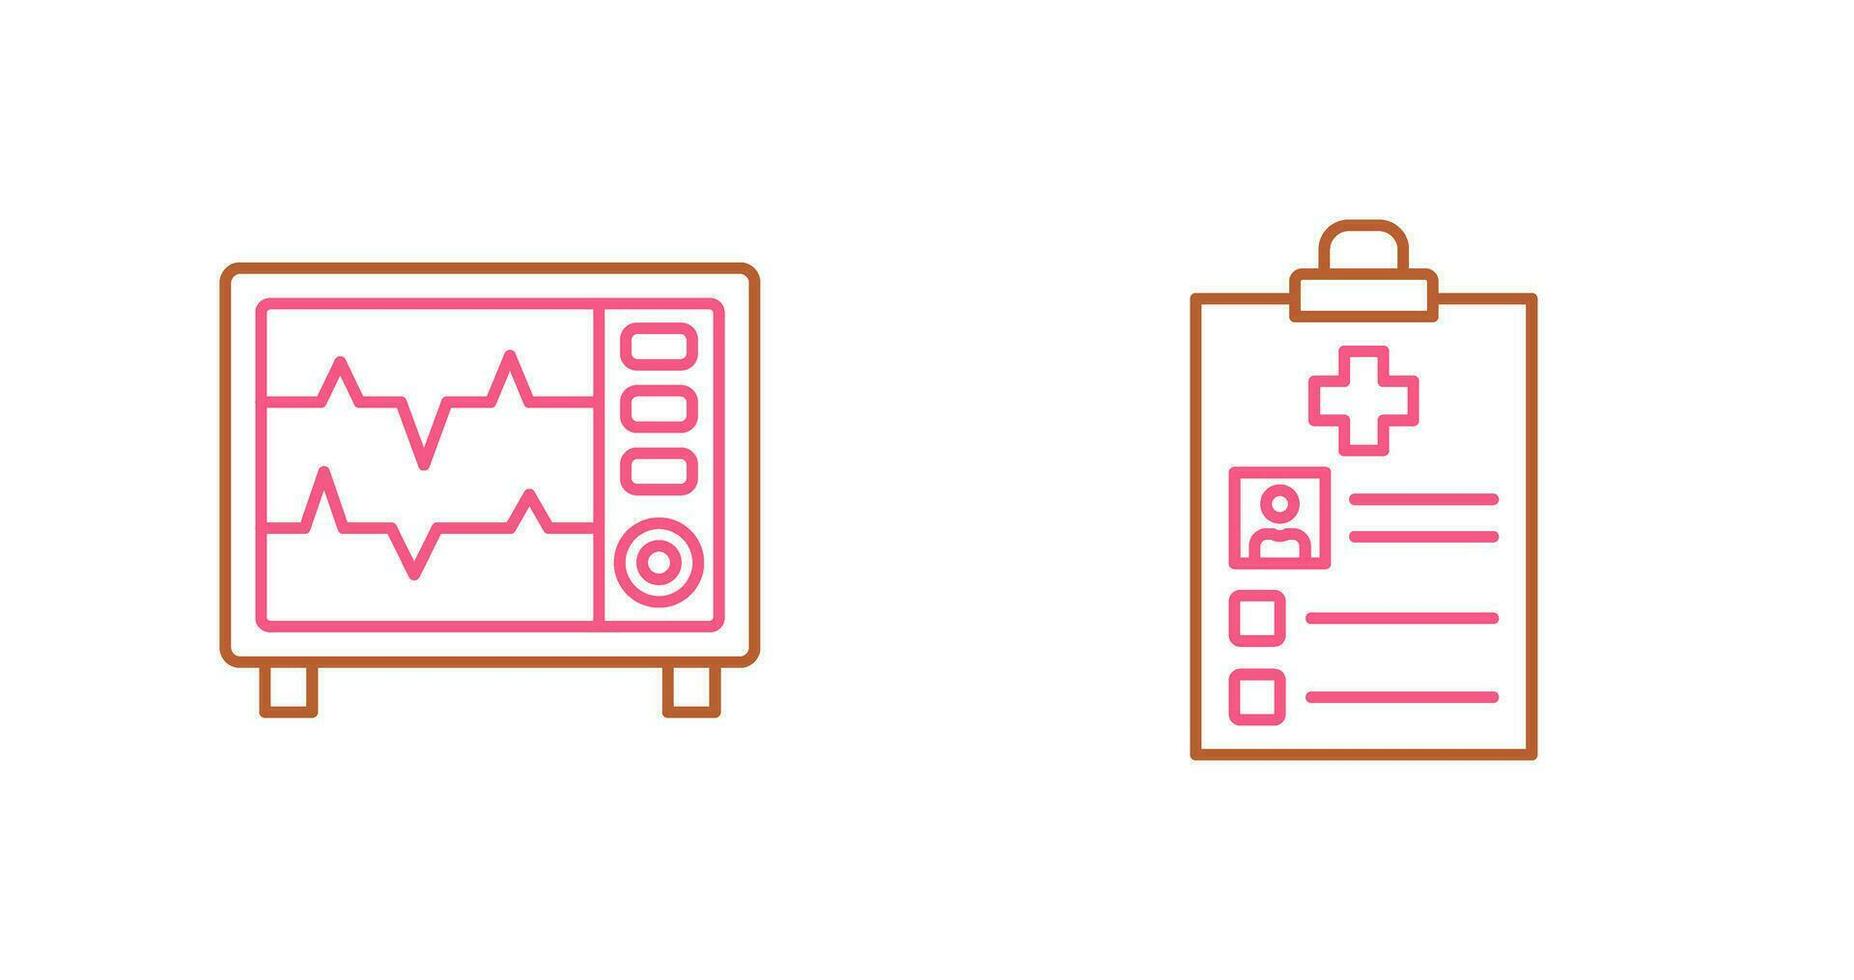 Heart Rate Moniter and Record Icon vector